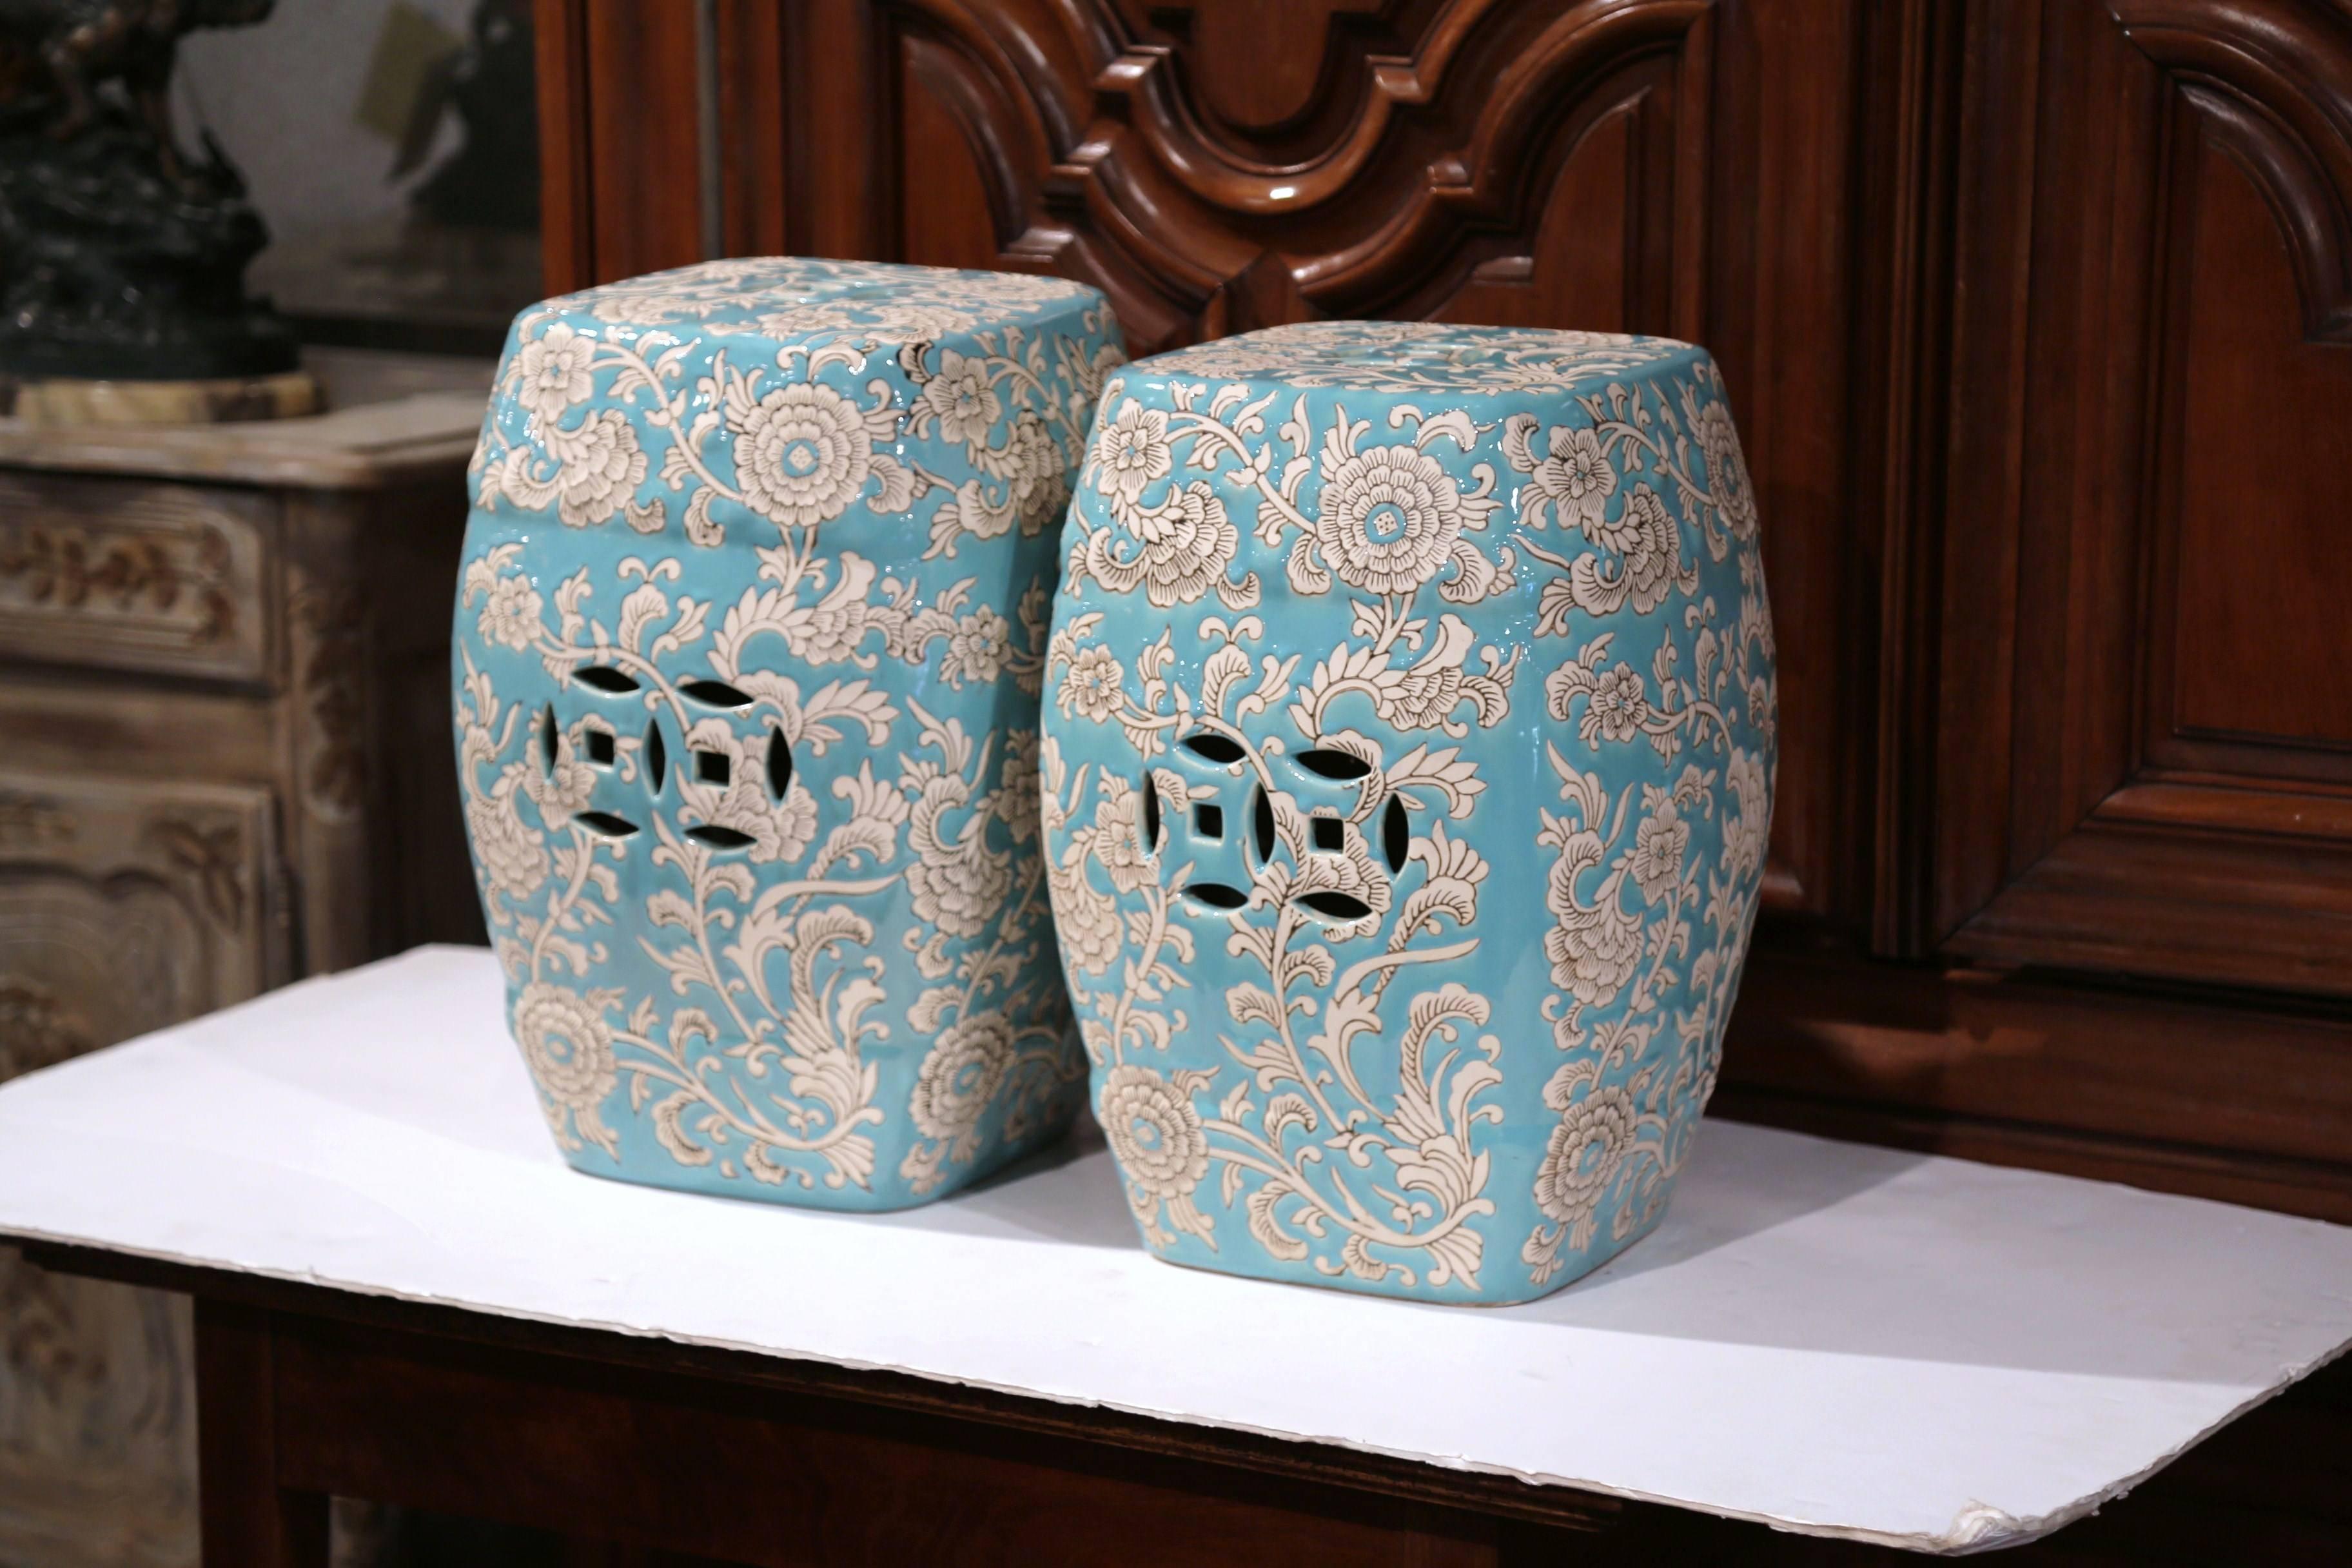 This interesting pair of colorful vintage garden stools were sculpted in China, circa 1970. The square porcelain stools have cut-out designs on all four sides and feature hand-painted flowers. The traditional, oriental ceramic stools are in great